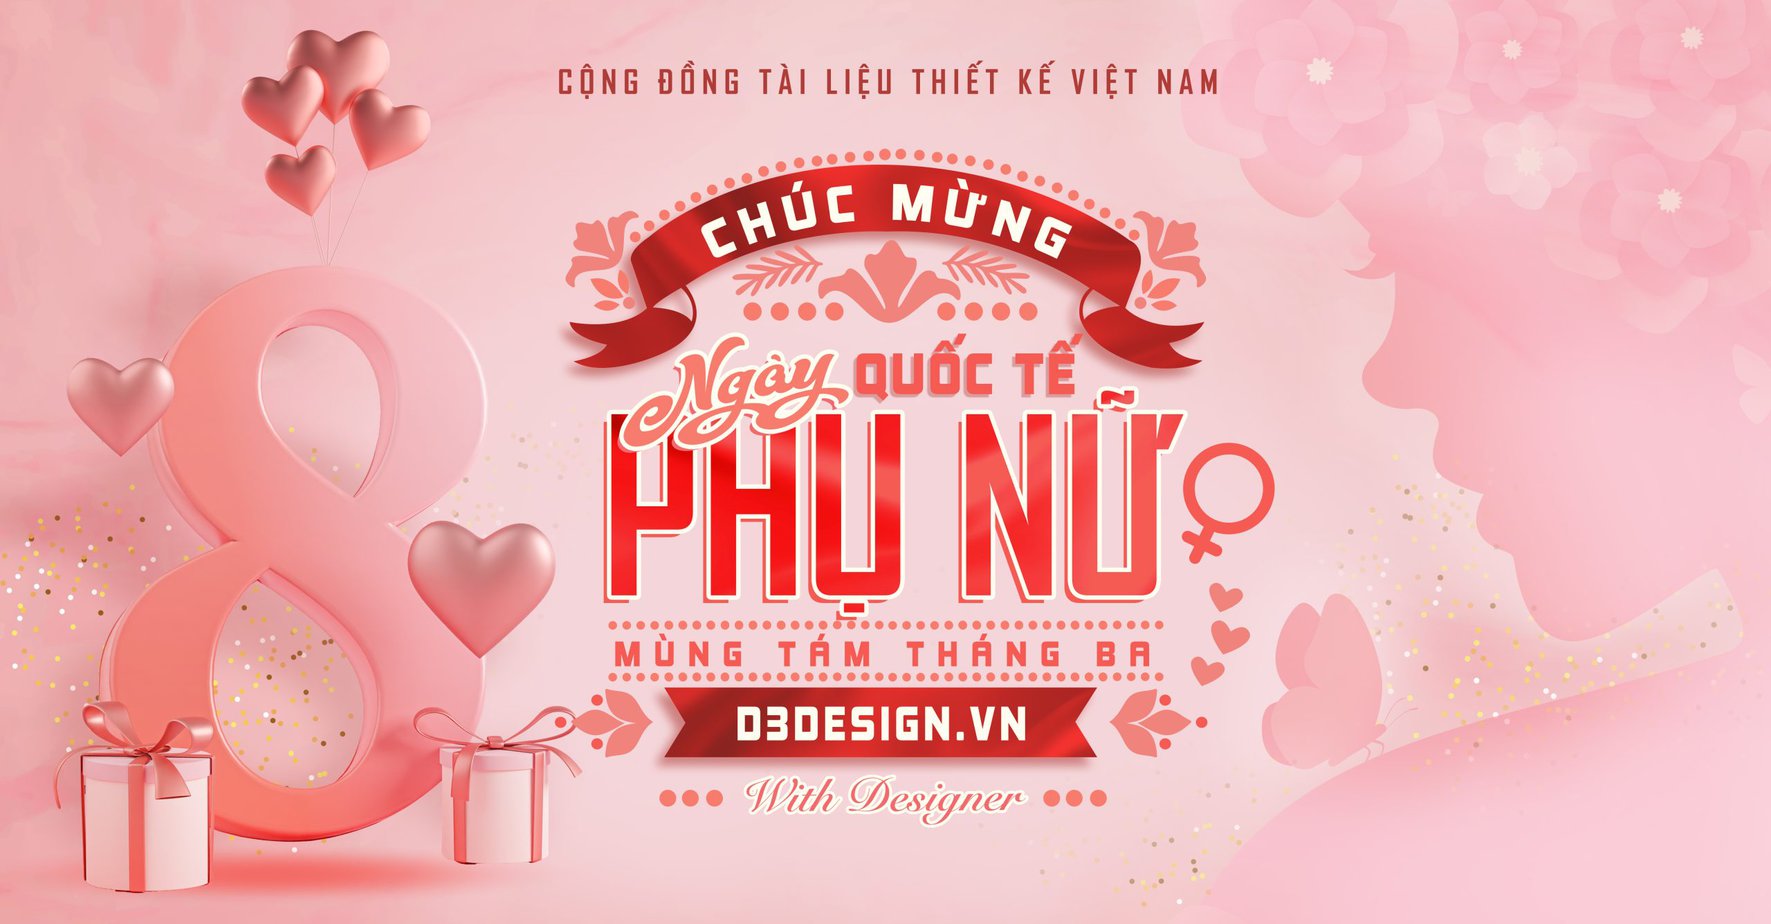 Banner ngay quoc te phu nu 4 scaled